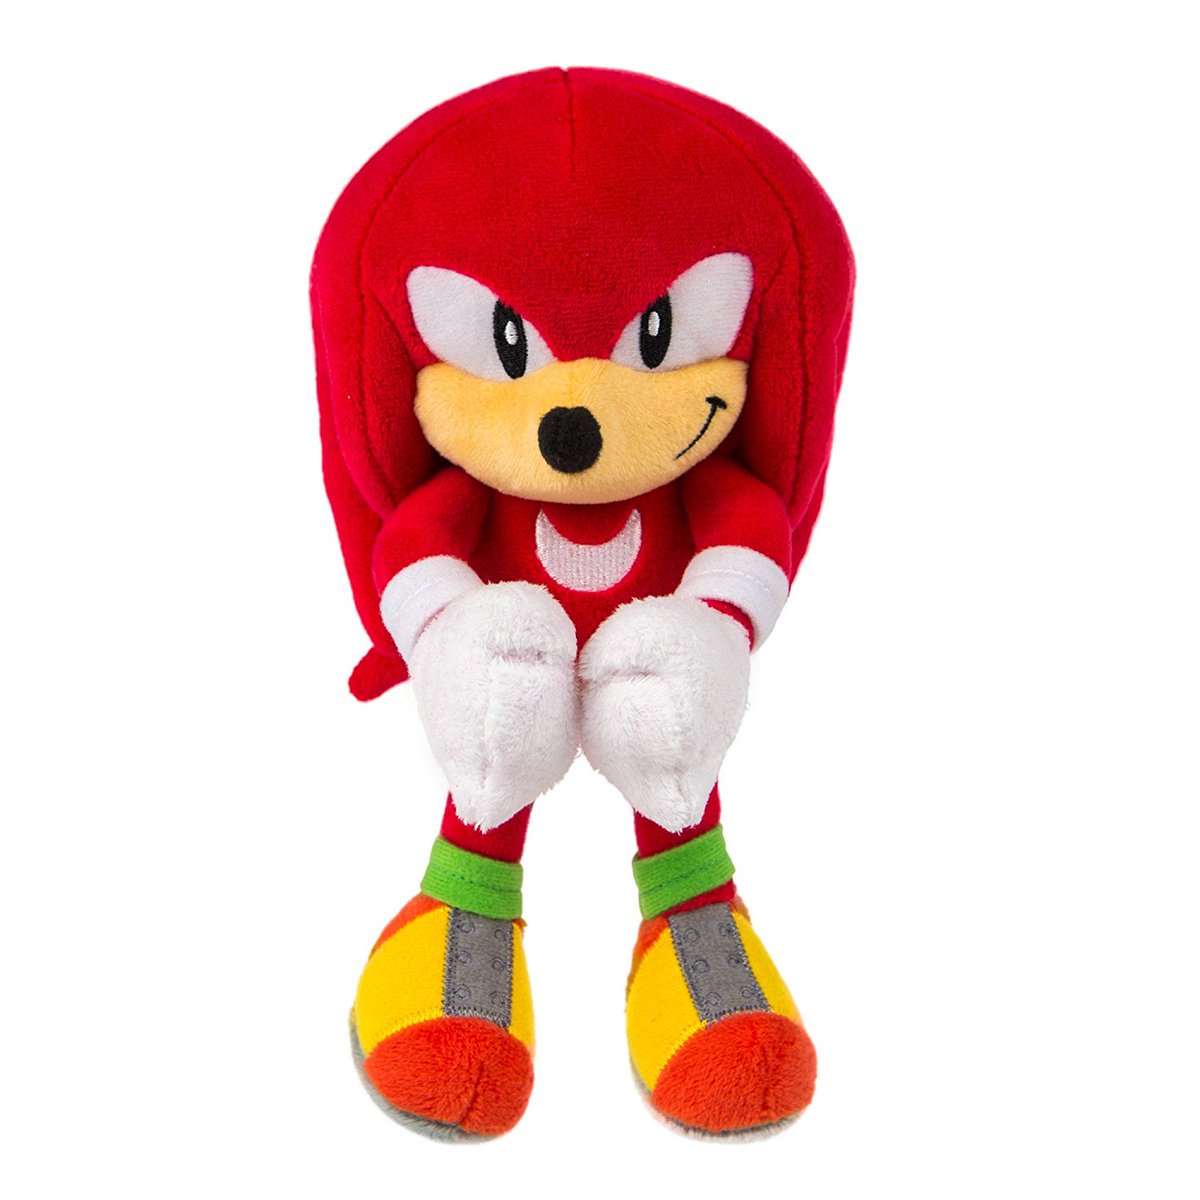 Patmac Here S The Tomy Sonic Collector Series 8 Classic Knuckles Plush Set Be To Released Sometime In The Fall Looks Really Good T Co 5gubxg2j75